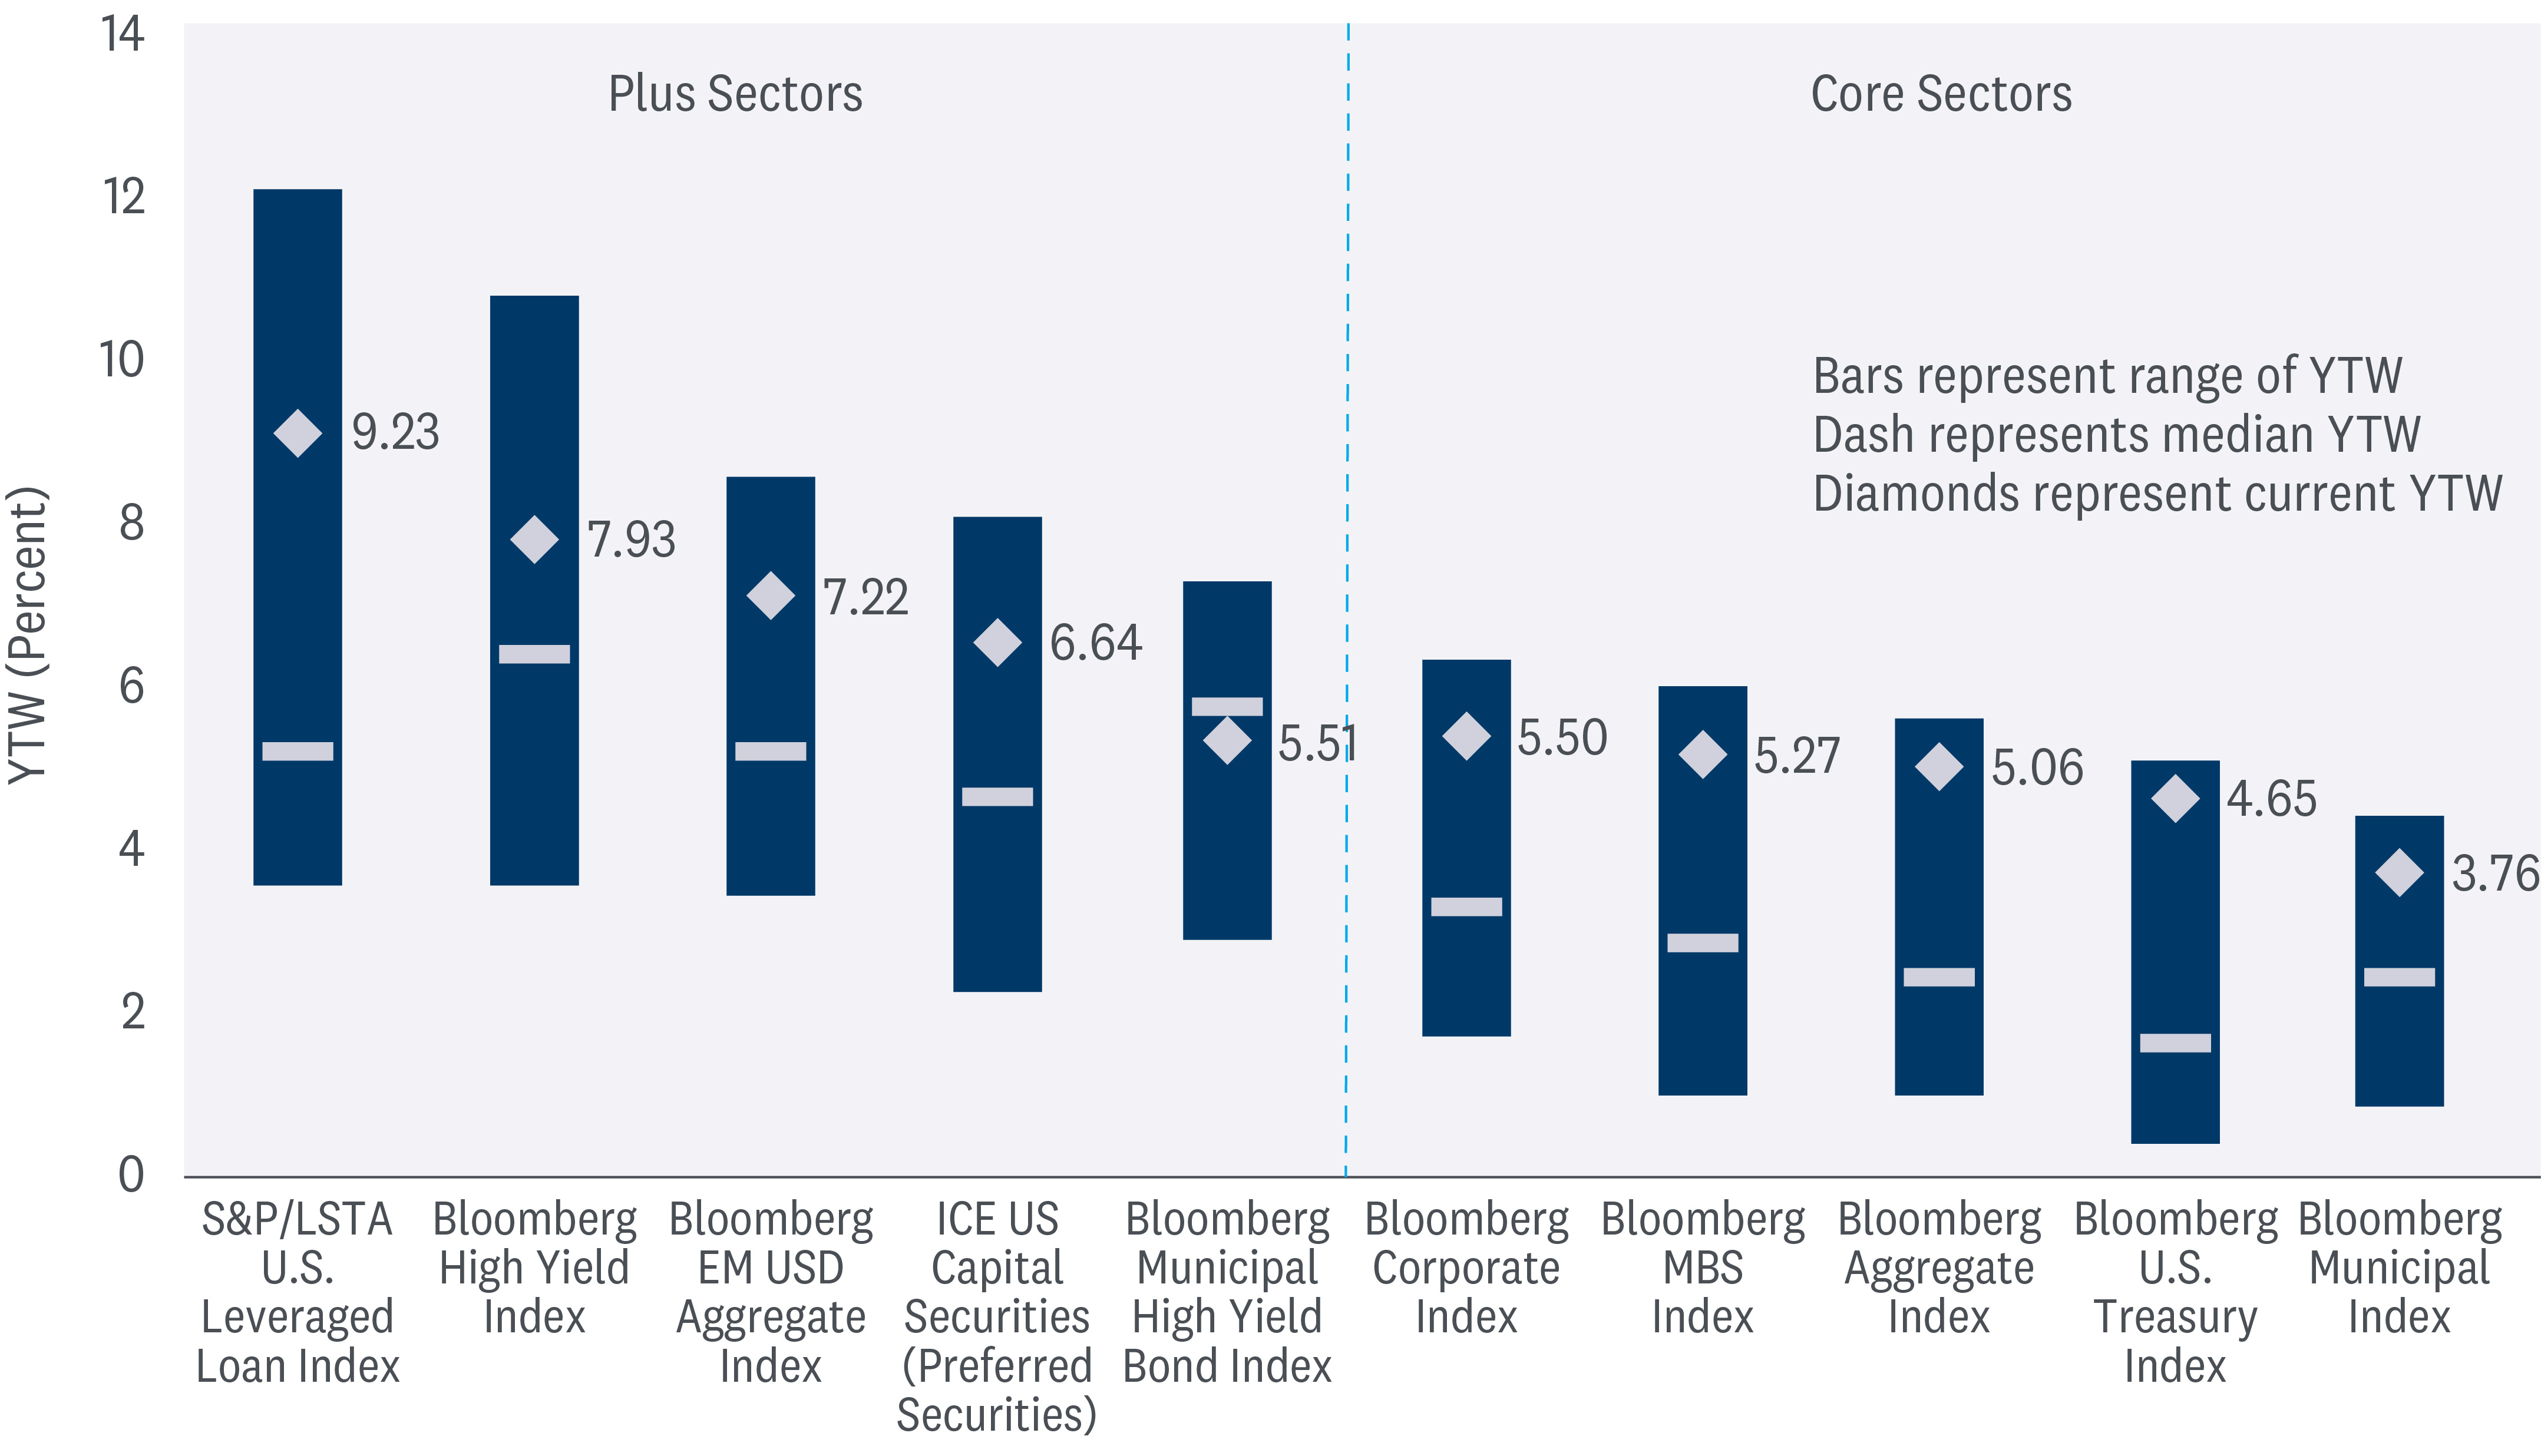 The chart depicts the yield to worst (YTW) of different bond indexes. The YTW represents the worst possible return an investor could receive if the bond is called or redeemed before maturity. The chart is divided into two sections: "Plus Sectors" and "Core Sectors". The "Plus Sectors" section includes indexes with higher YTWs, while the "Core Sectors" section includes indexes with lower YTWs. The chart depicts the range of YTWs for each index, as well as the median YTW and the current YTW. The median YTW is represented by a dashed line, while the current YTW is represented by a diamond. The range of YTWs is represented by the bar itself.